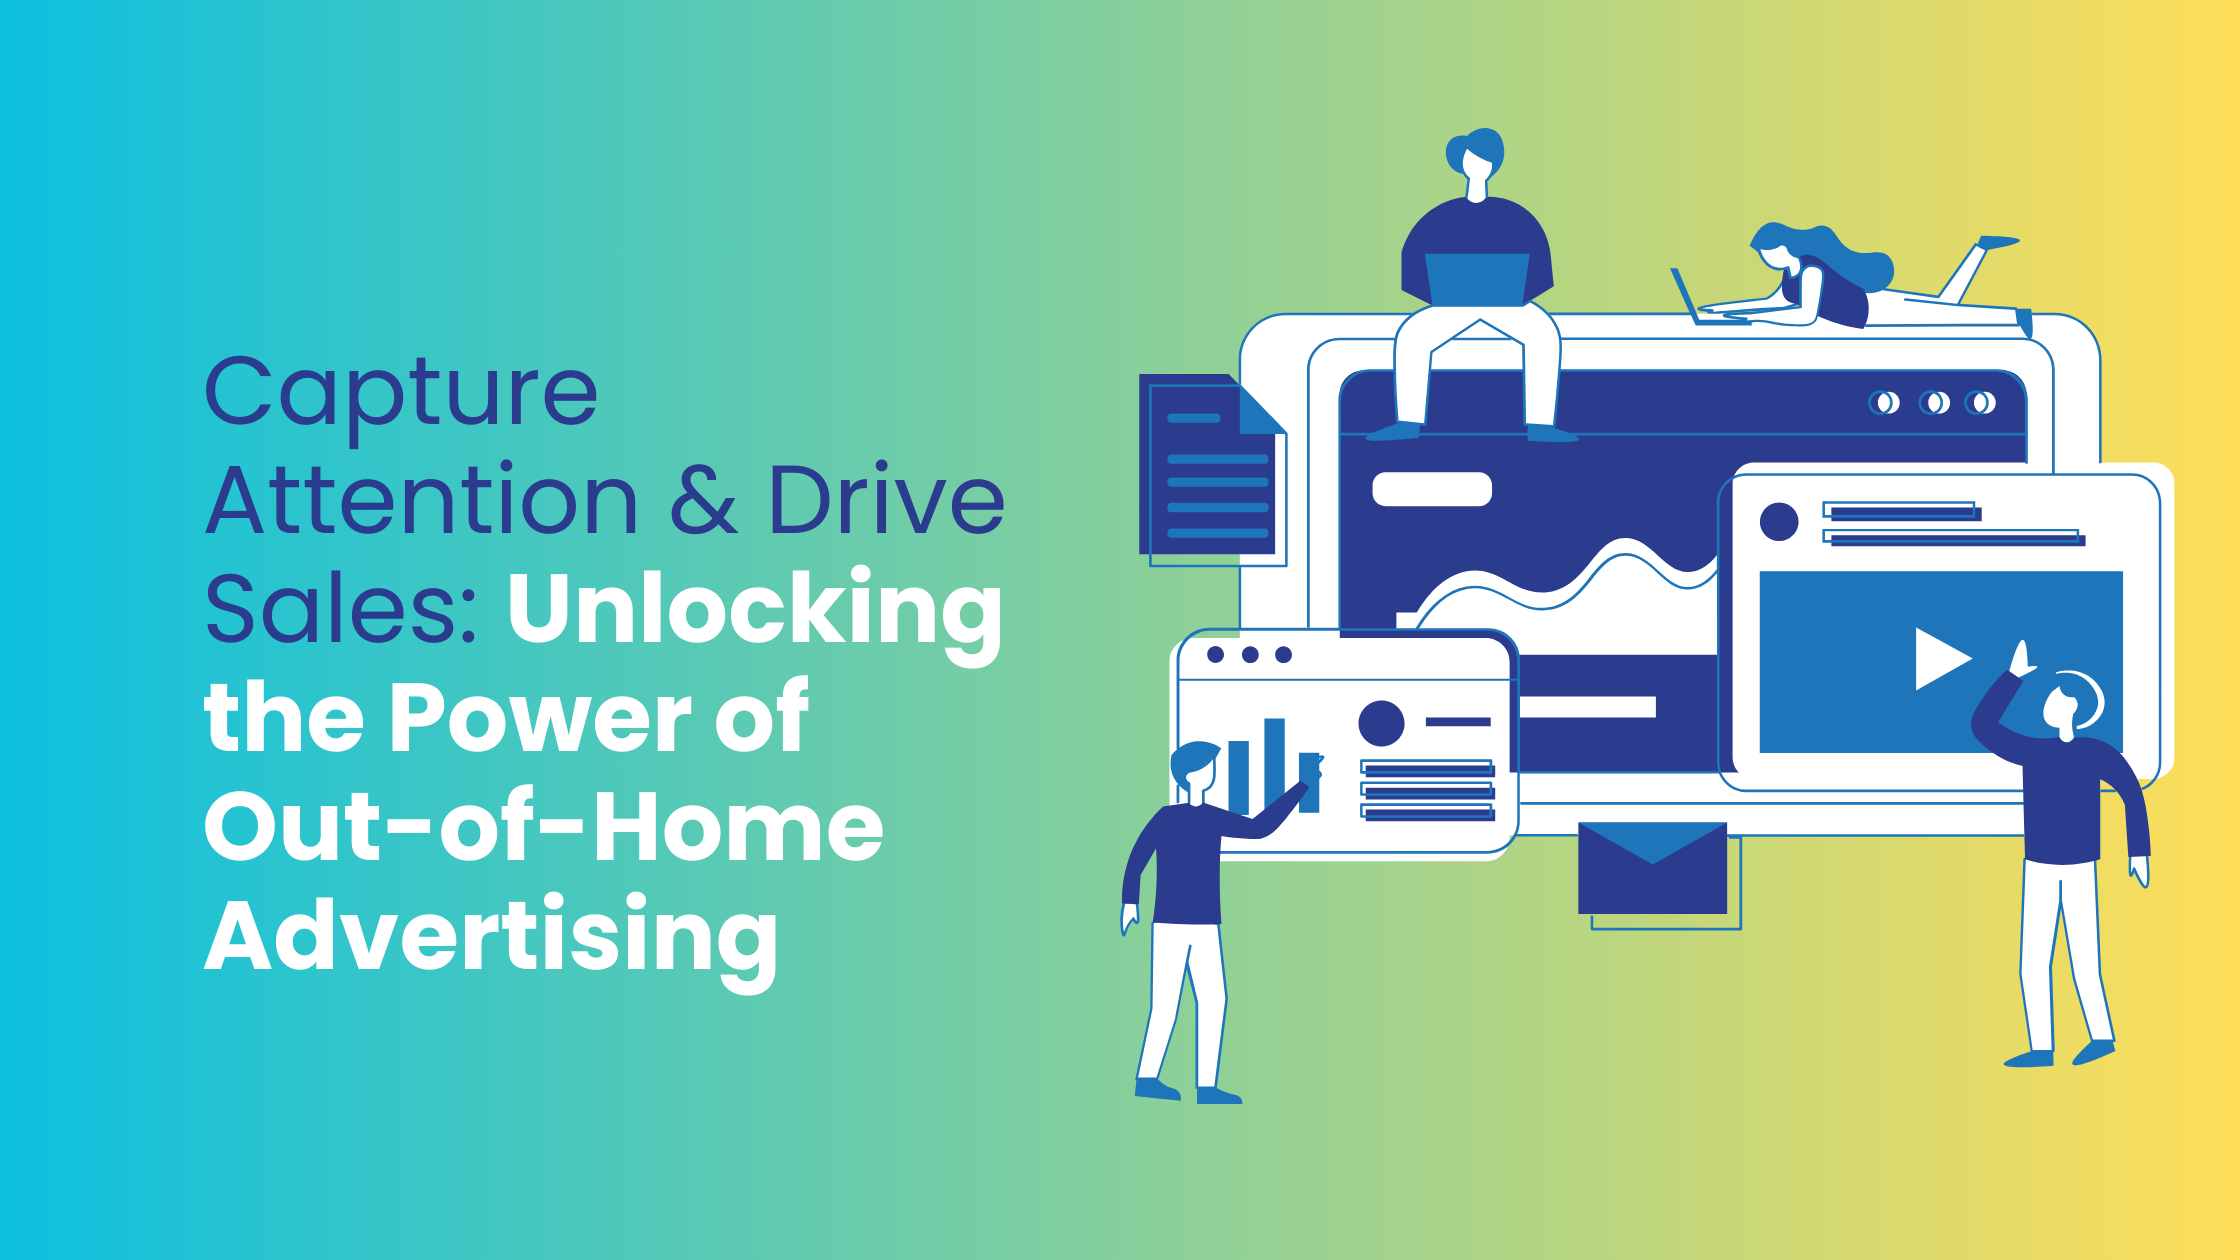 Capture Attention & Drive Sales: Unlocking the Power of Out-of-Home Advertising